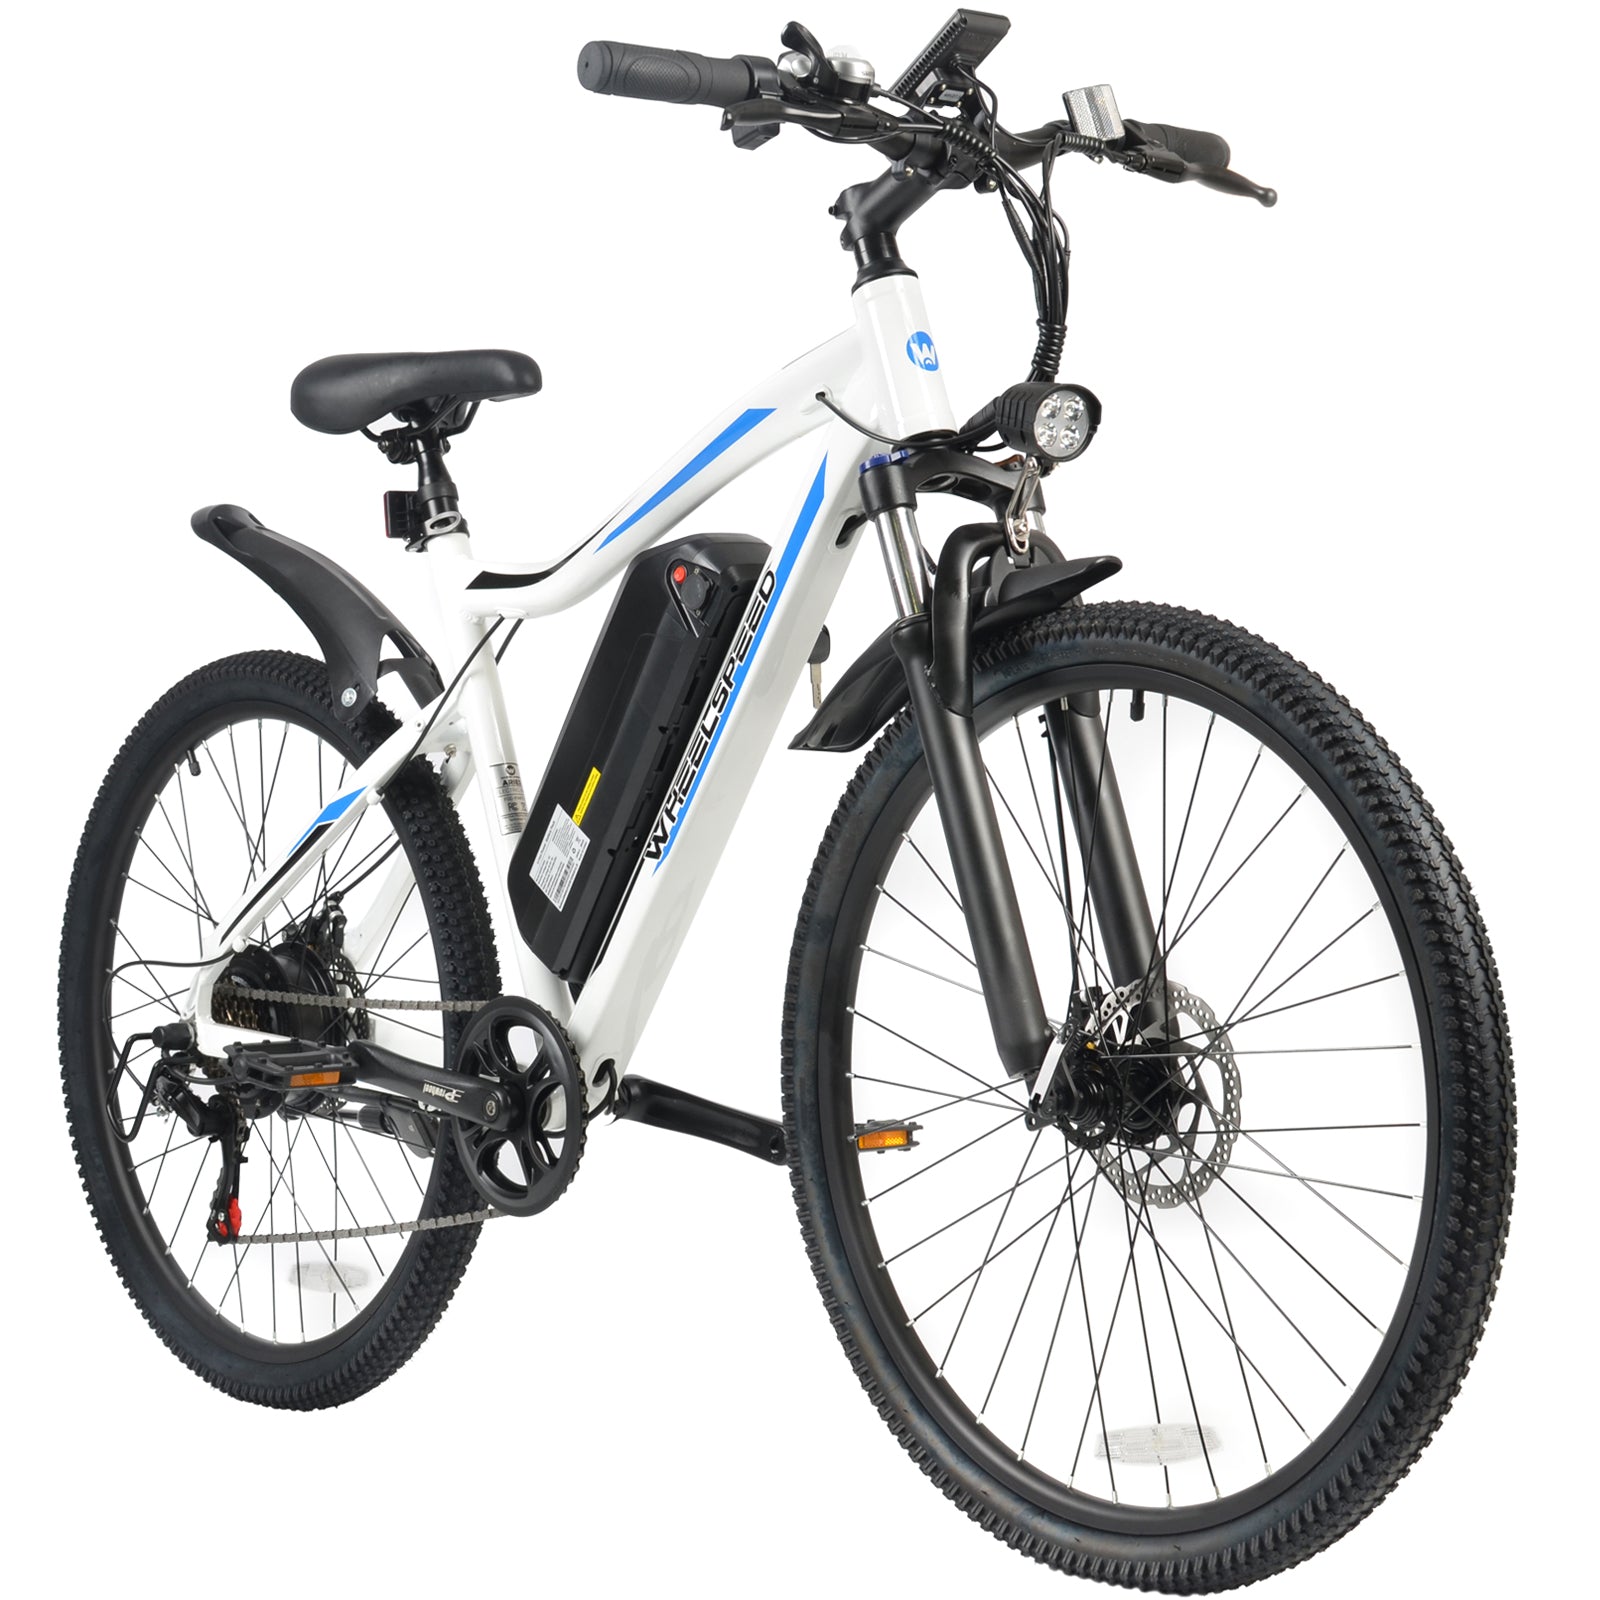 Wheelspeed Electric Mountain Bike with Lockable Suspension